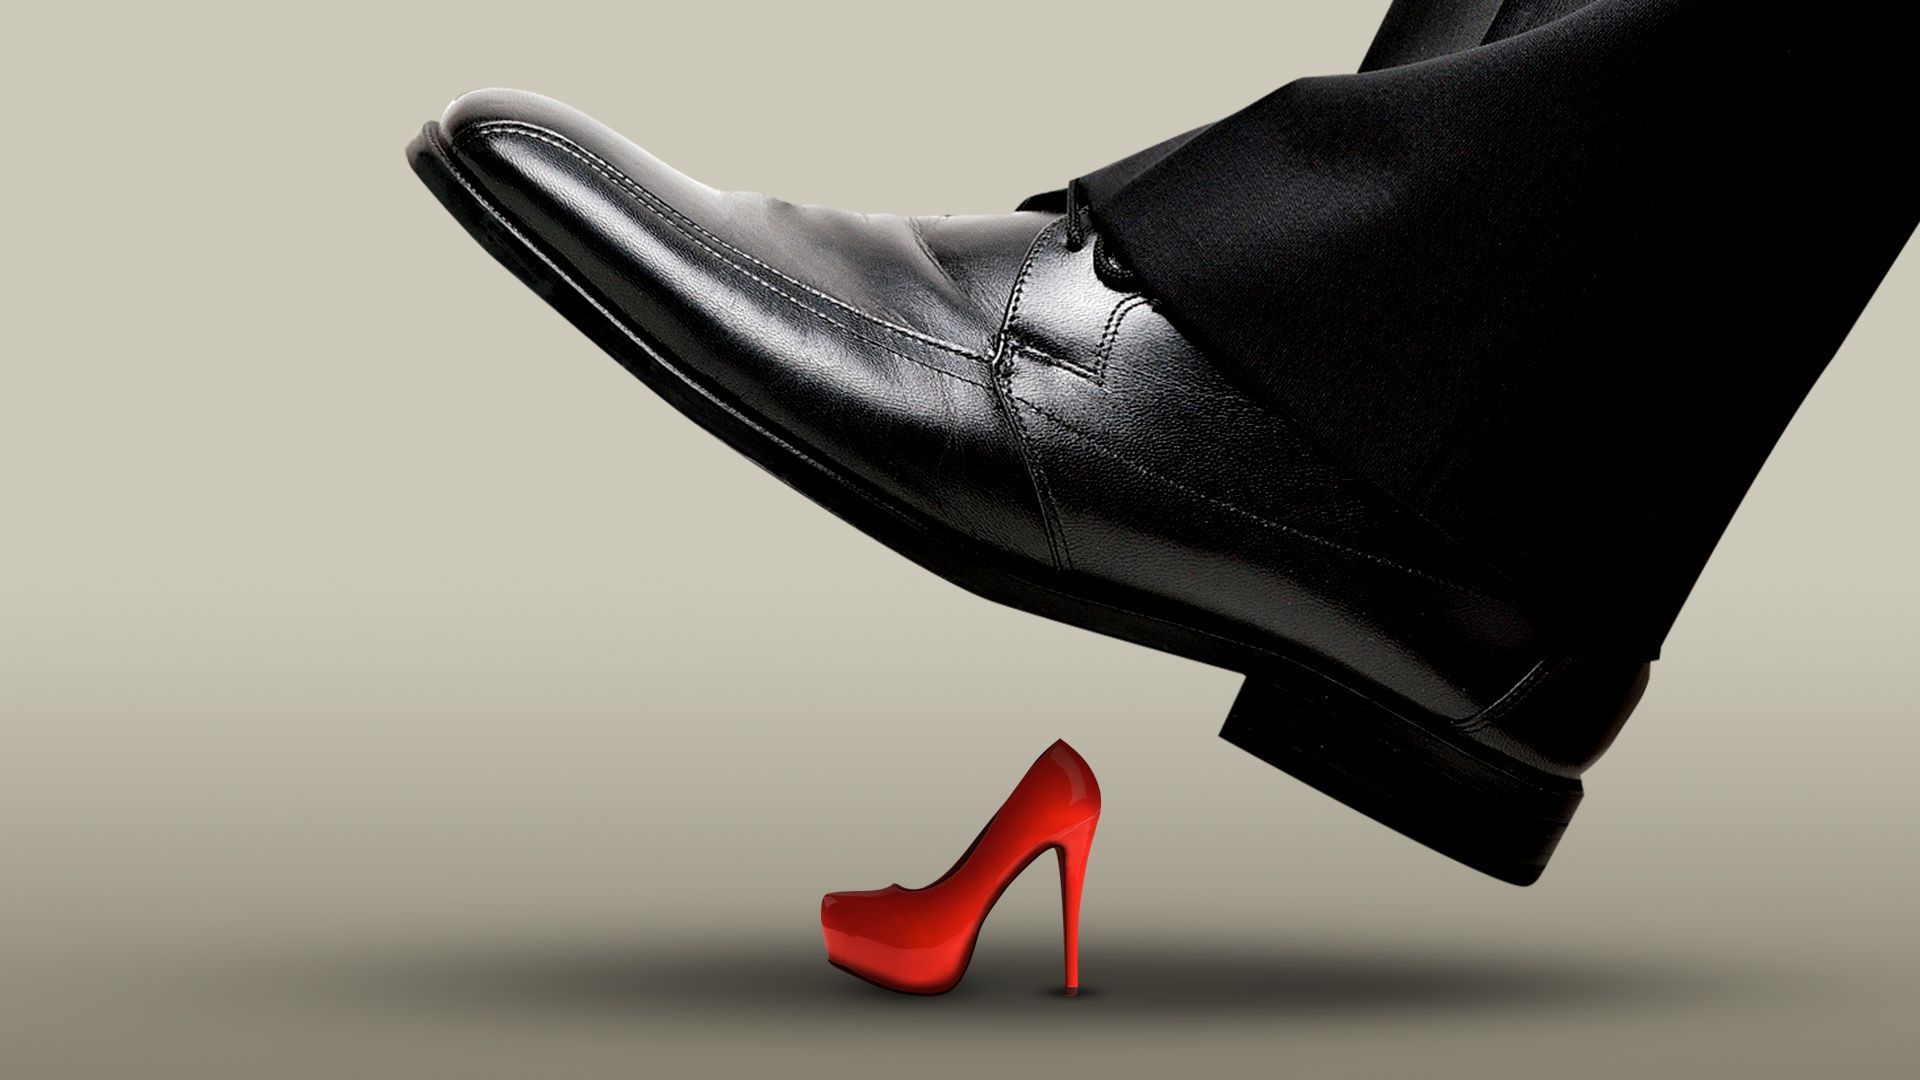 Illustration of a very large business shoe about to stomp on a smaller red platform heel.